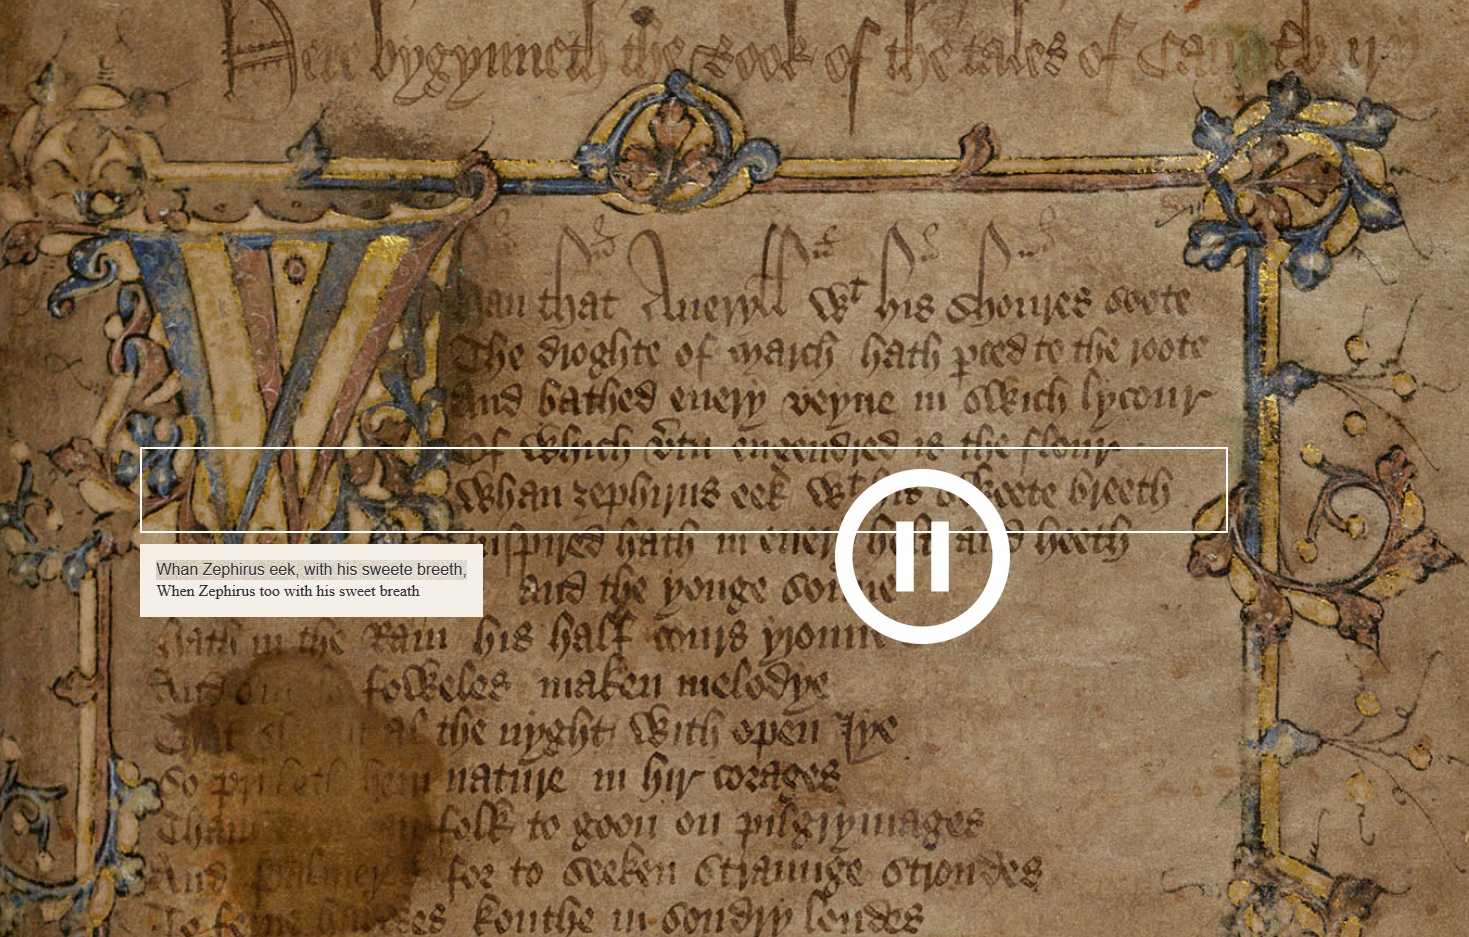 Canterbury Tales App Features Middle English Audio, Work by Monty Python’s Terry Jones